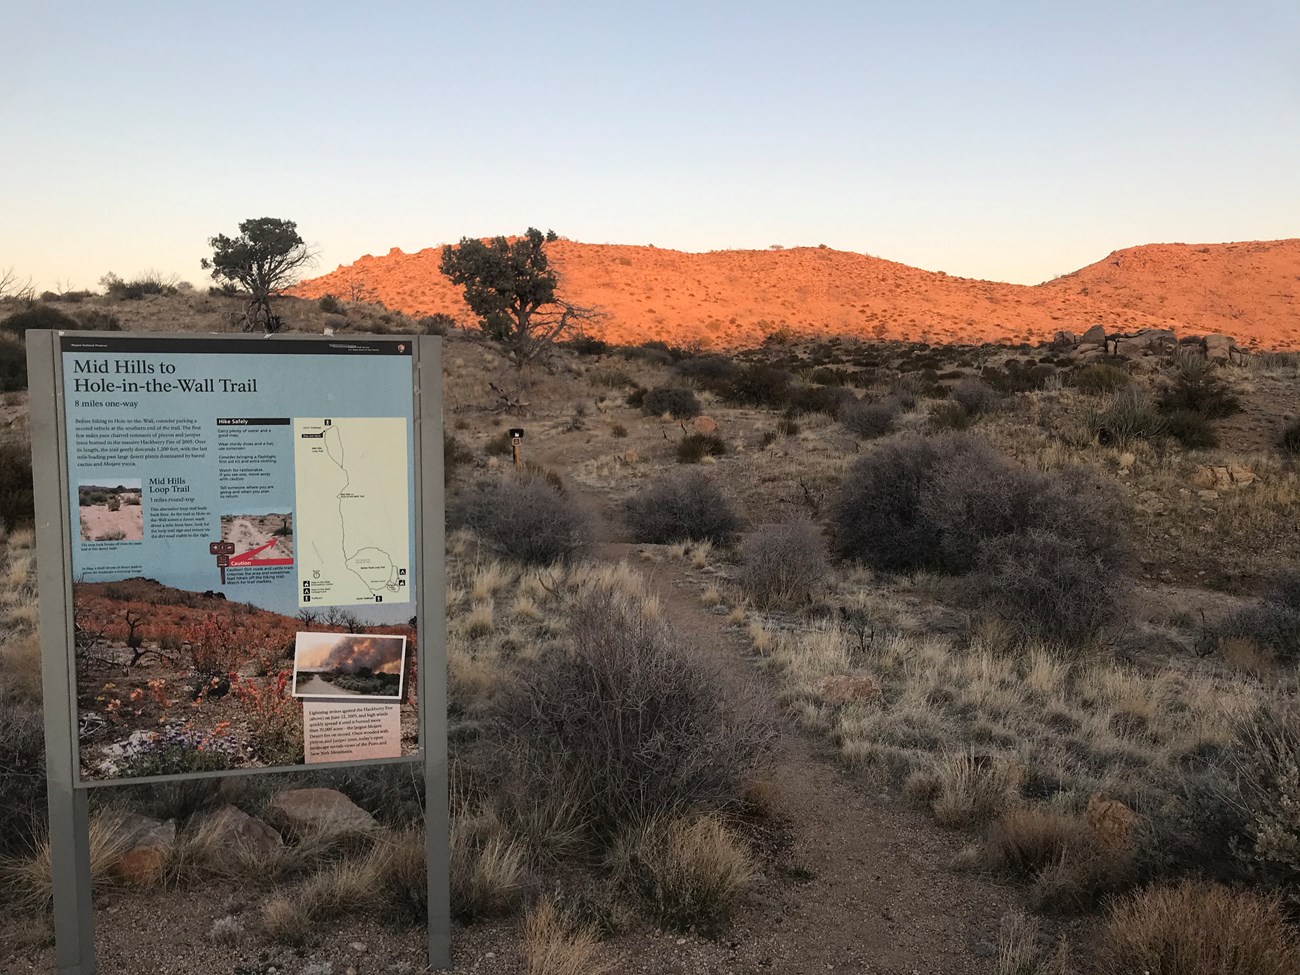 The Hole-in-the-Wall to Mid Hills trailhead at the Mid Hills Campground. The trail begins with an interpretive sign, passes through creosote, and goes towards hills illuminated by the setting sun.